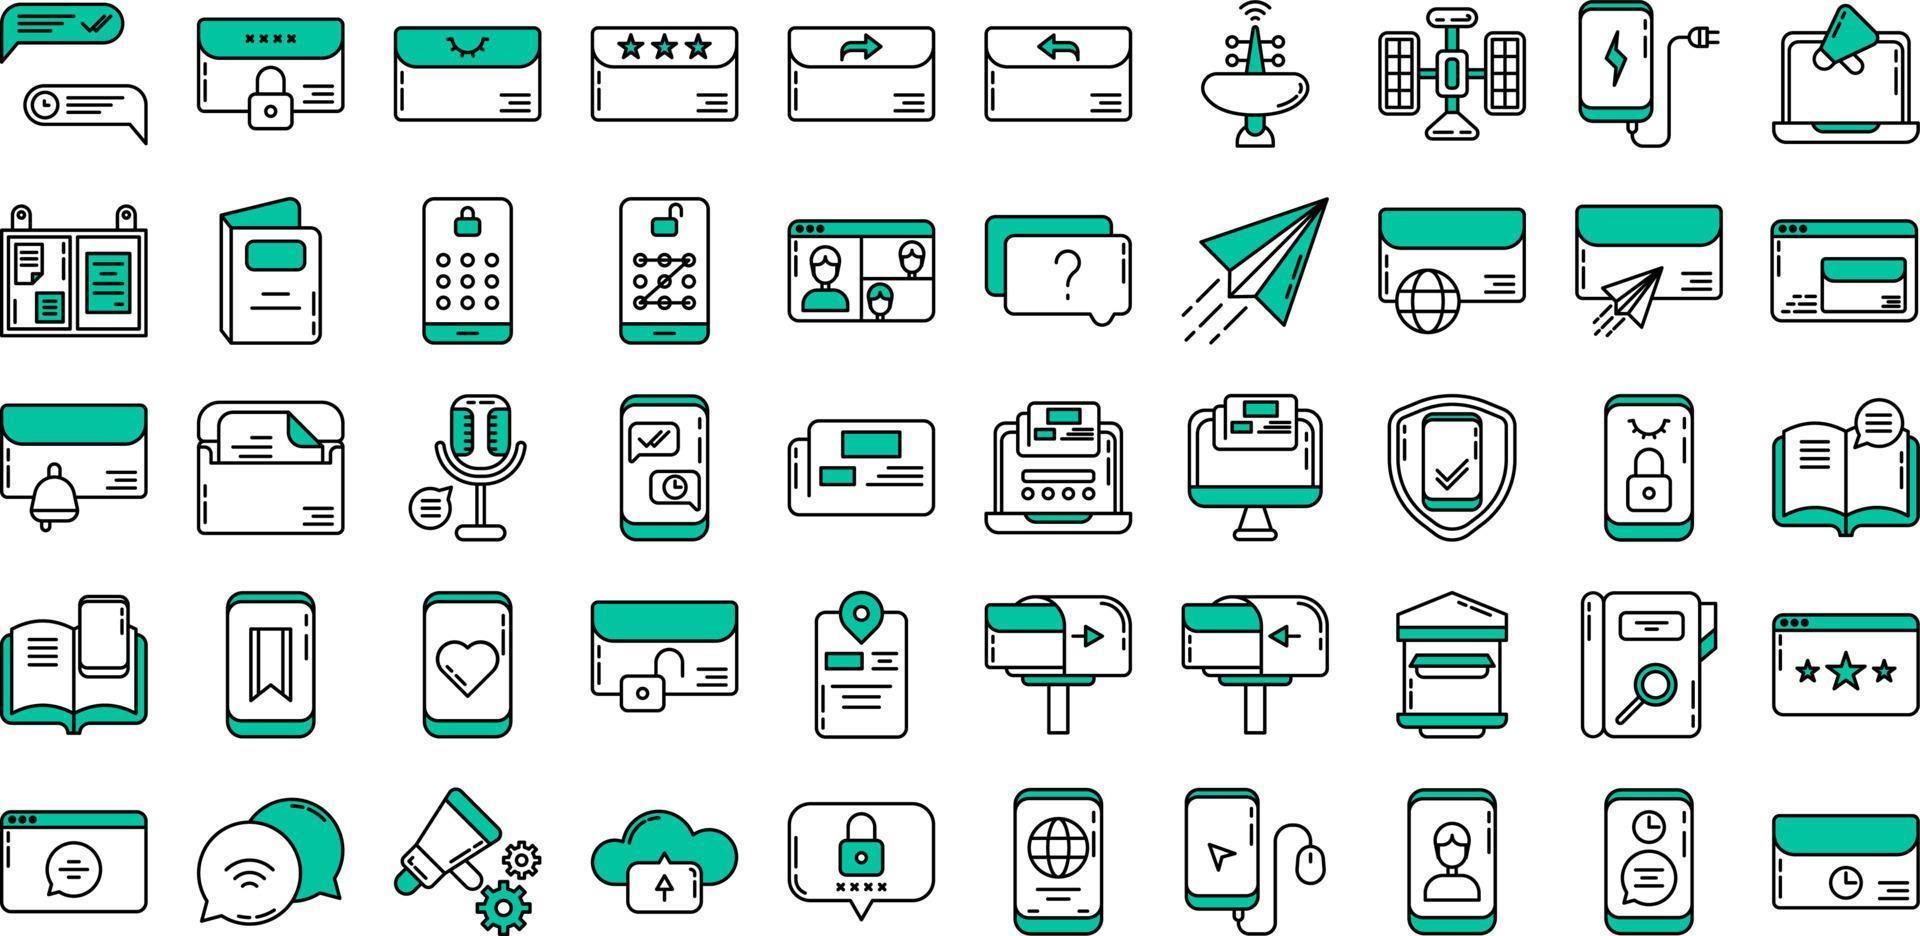 set of communication and message icons on transparent background vector